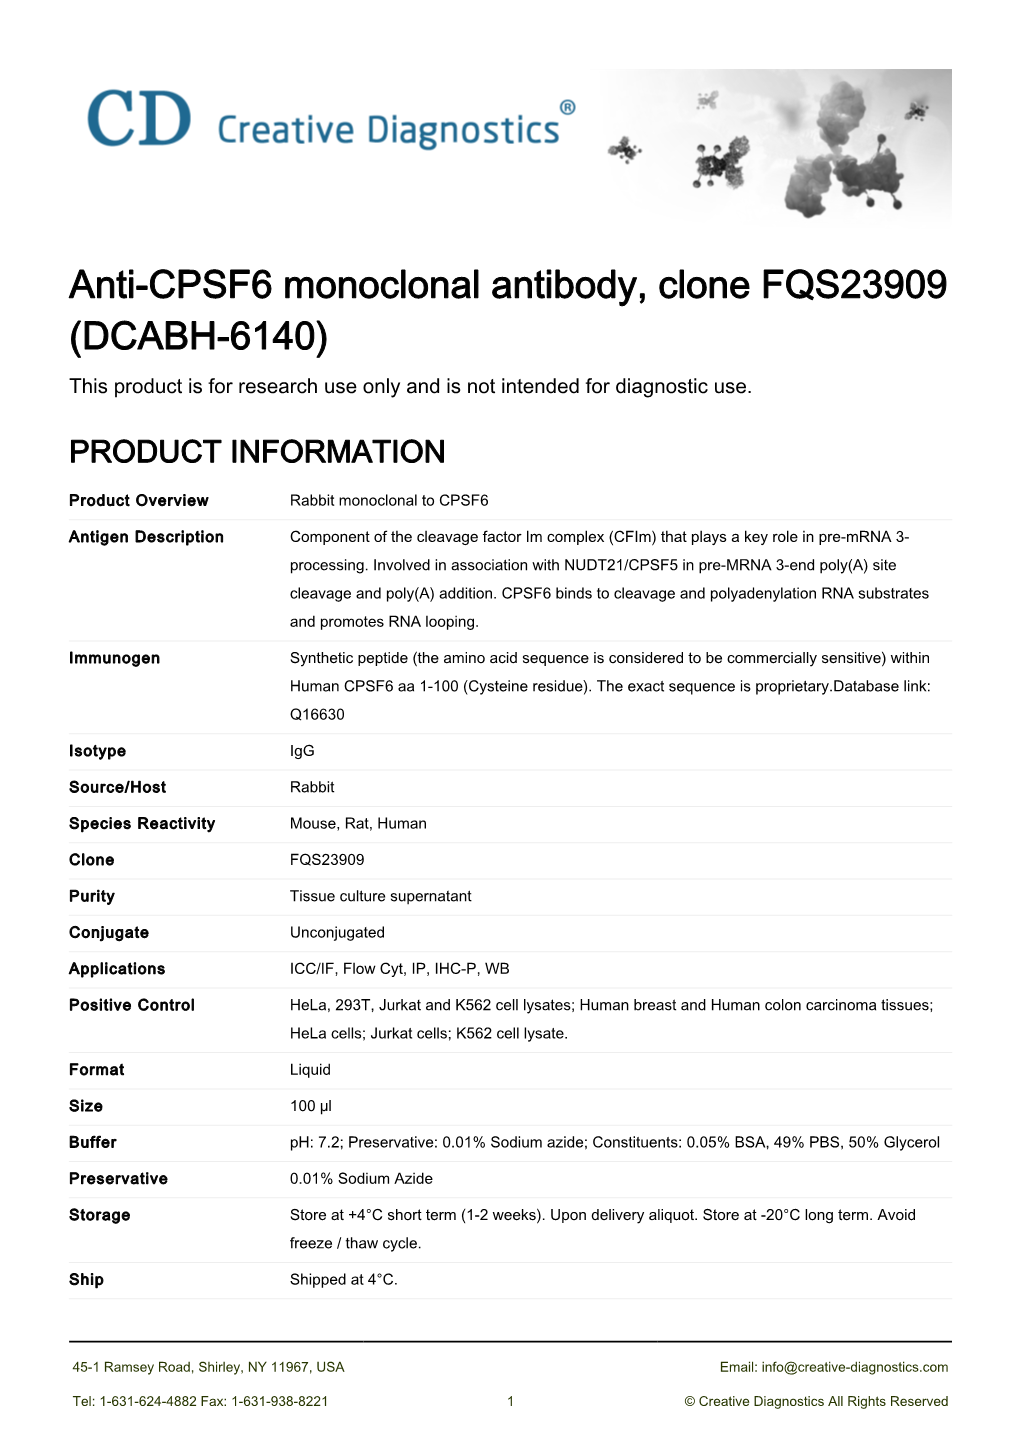 Anti-CPSF6 Monoclonal Antibody, Clone FQS23909 (DCABH-6140) This Product Is for Research Use Only and Is Not Intended for Diagnostic Use